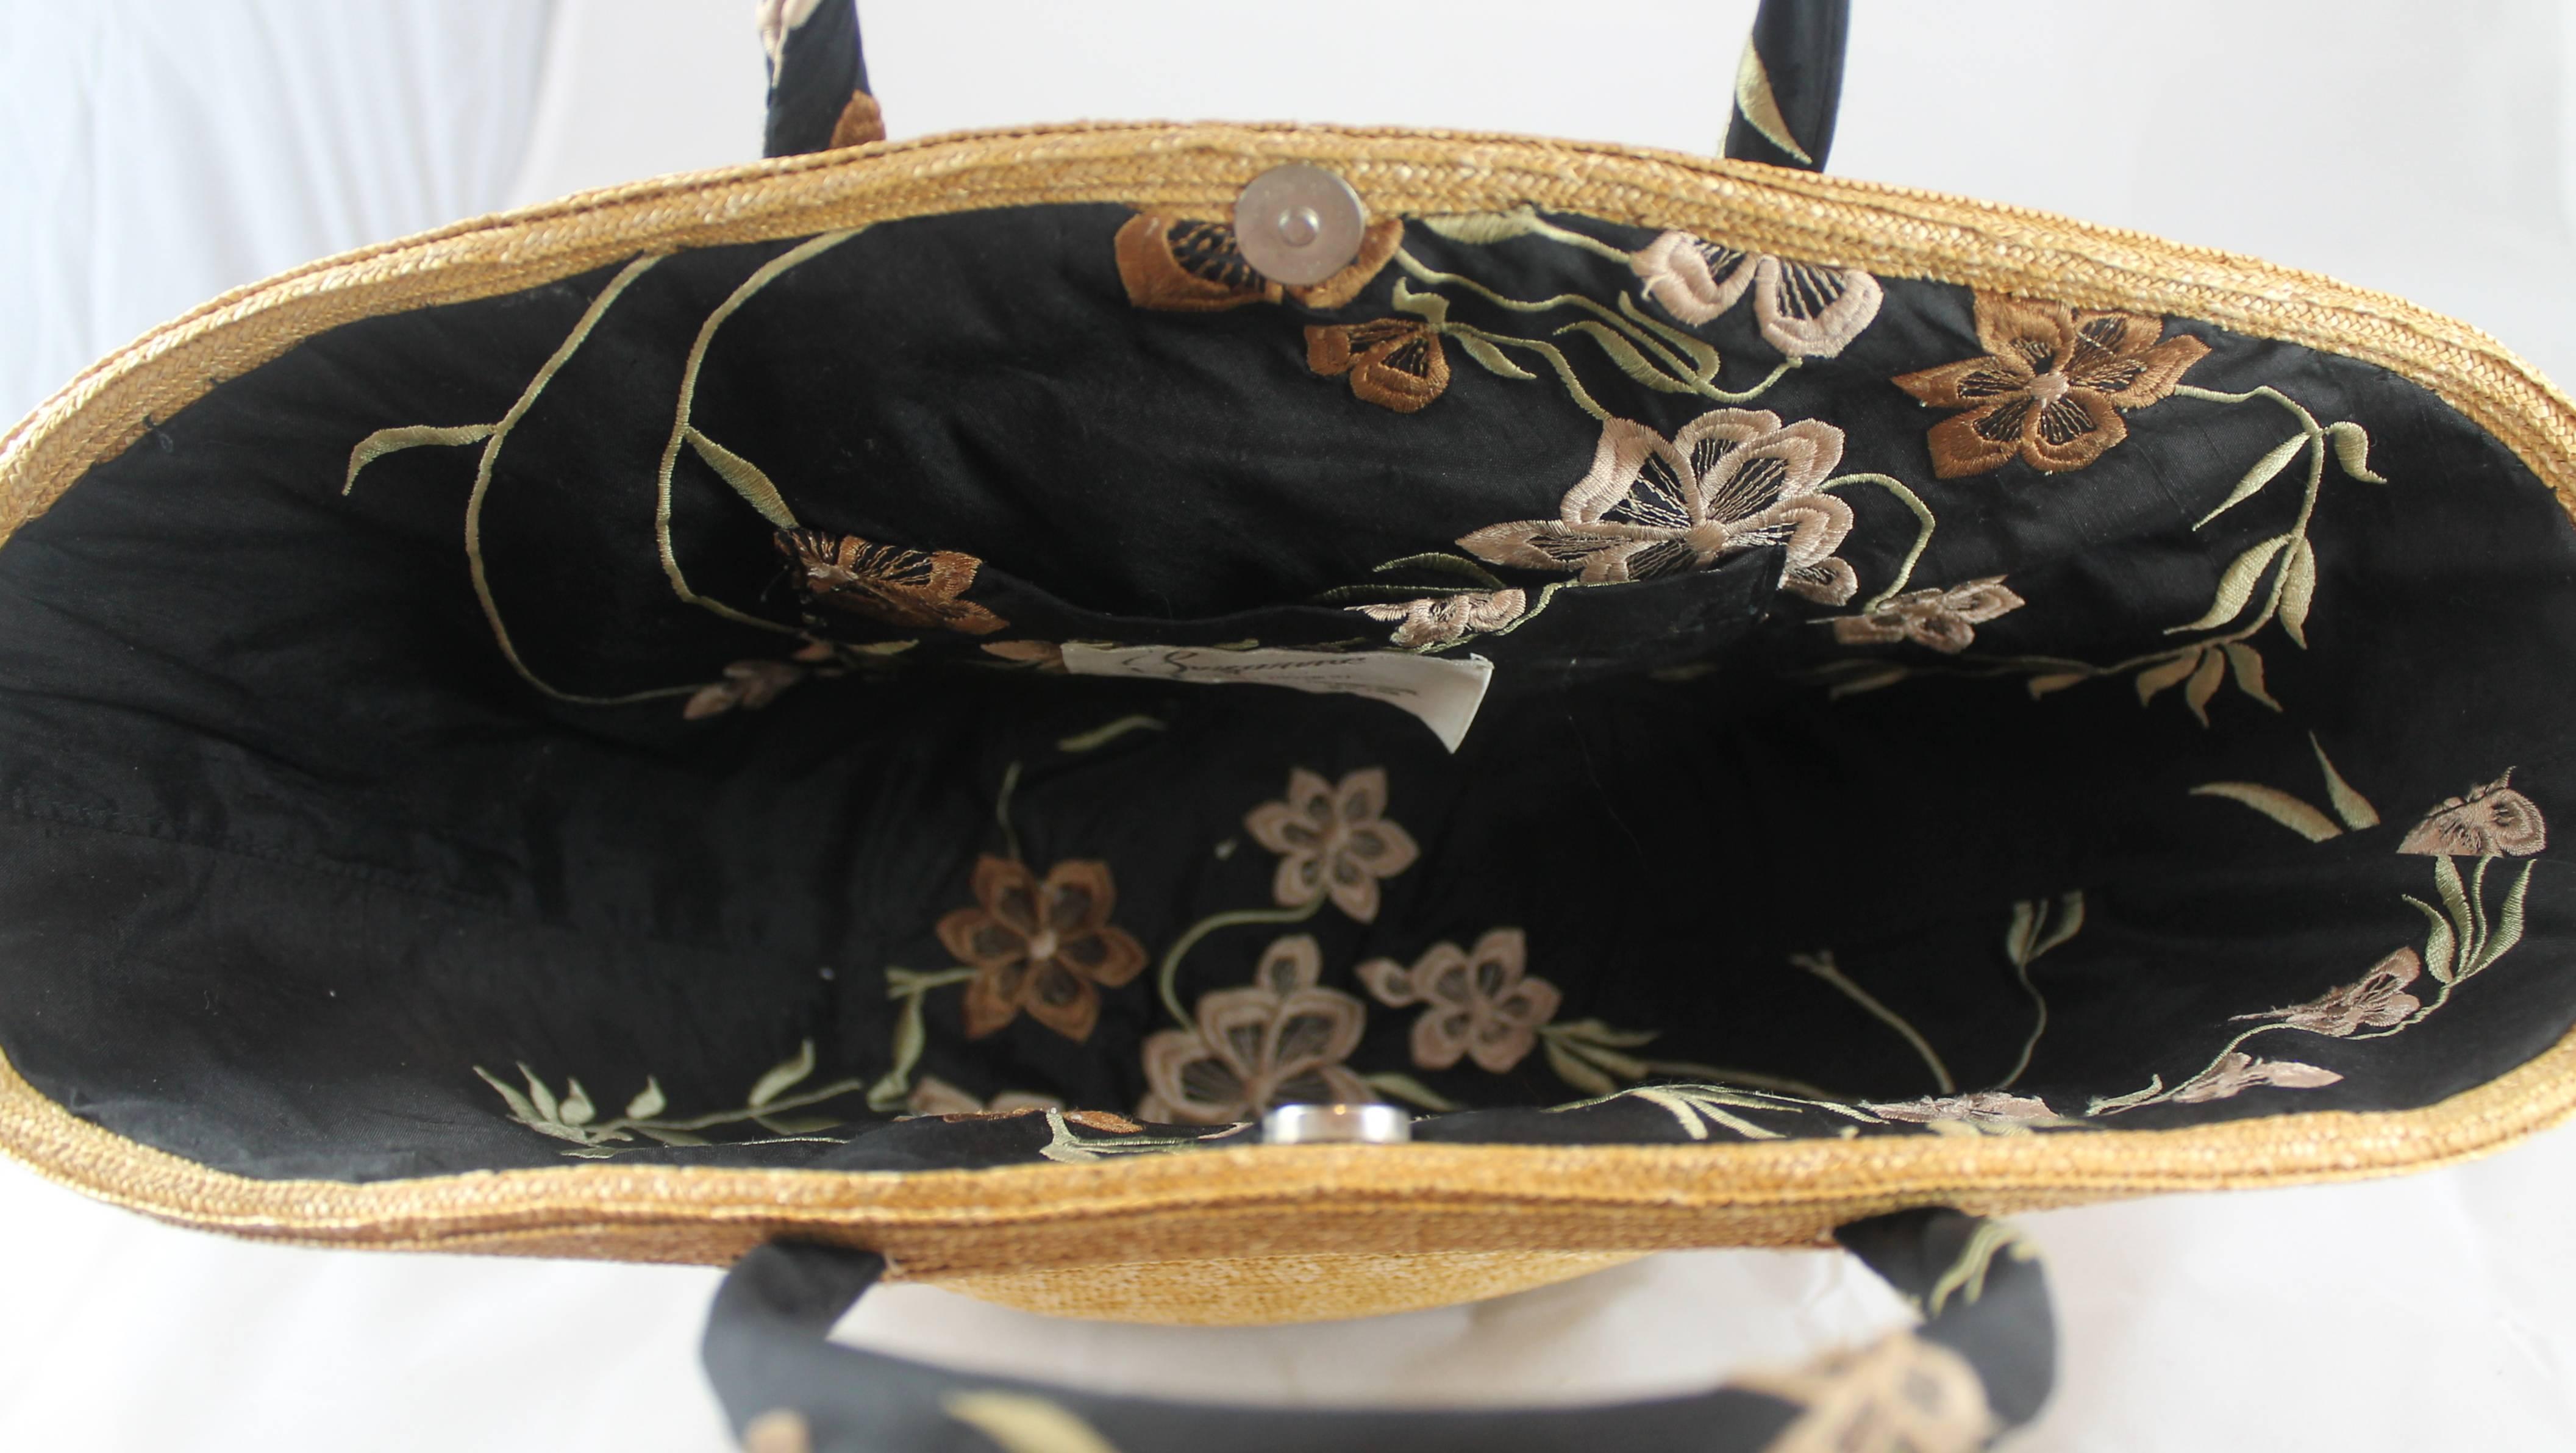 Suzanne Couture Millinery Small Tan Woven Straw Bag with Floral Handles 1